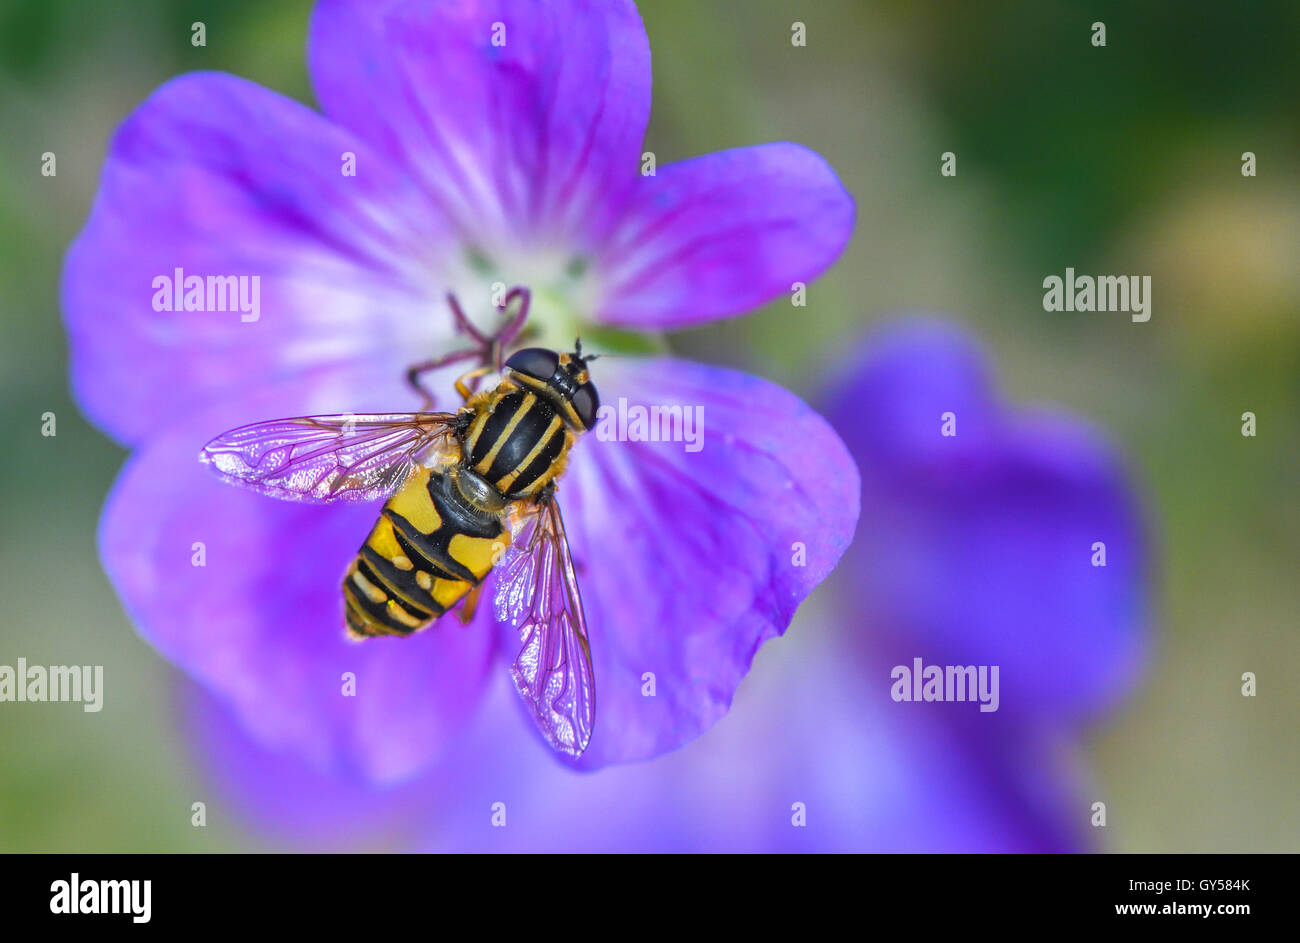 Close-up of a typical adult Hover-fly (Syrphus) feeding off nectar and pollen Stock Photo